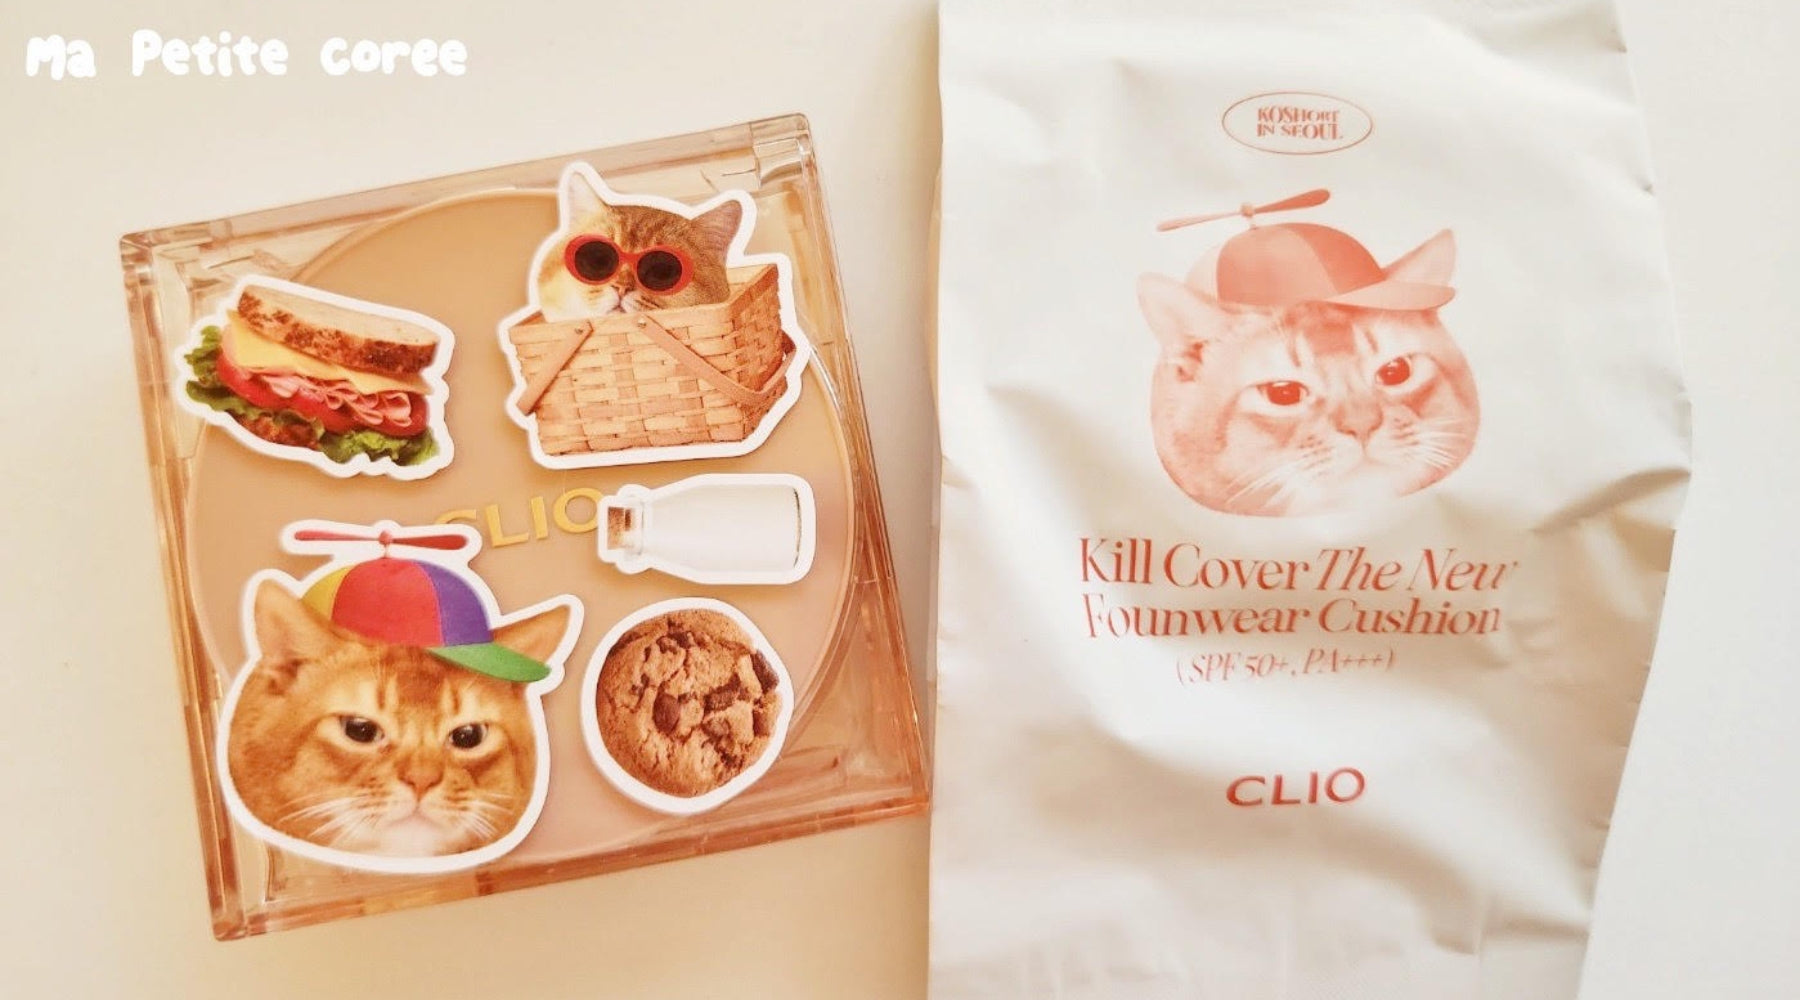 Review CLIO Cushion Koshort in Seoul